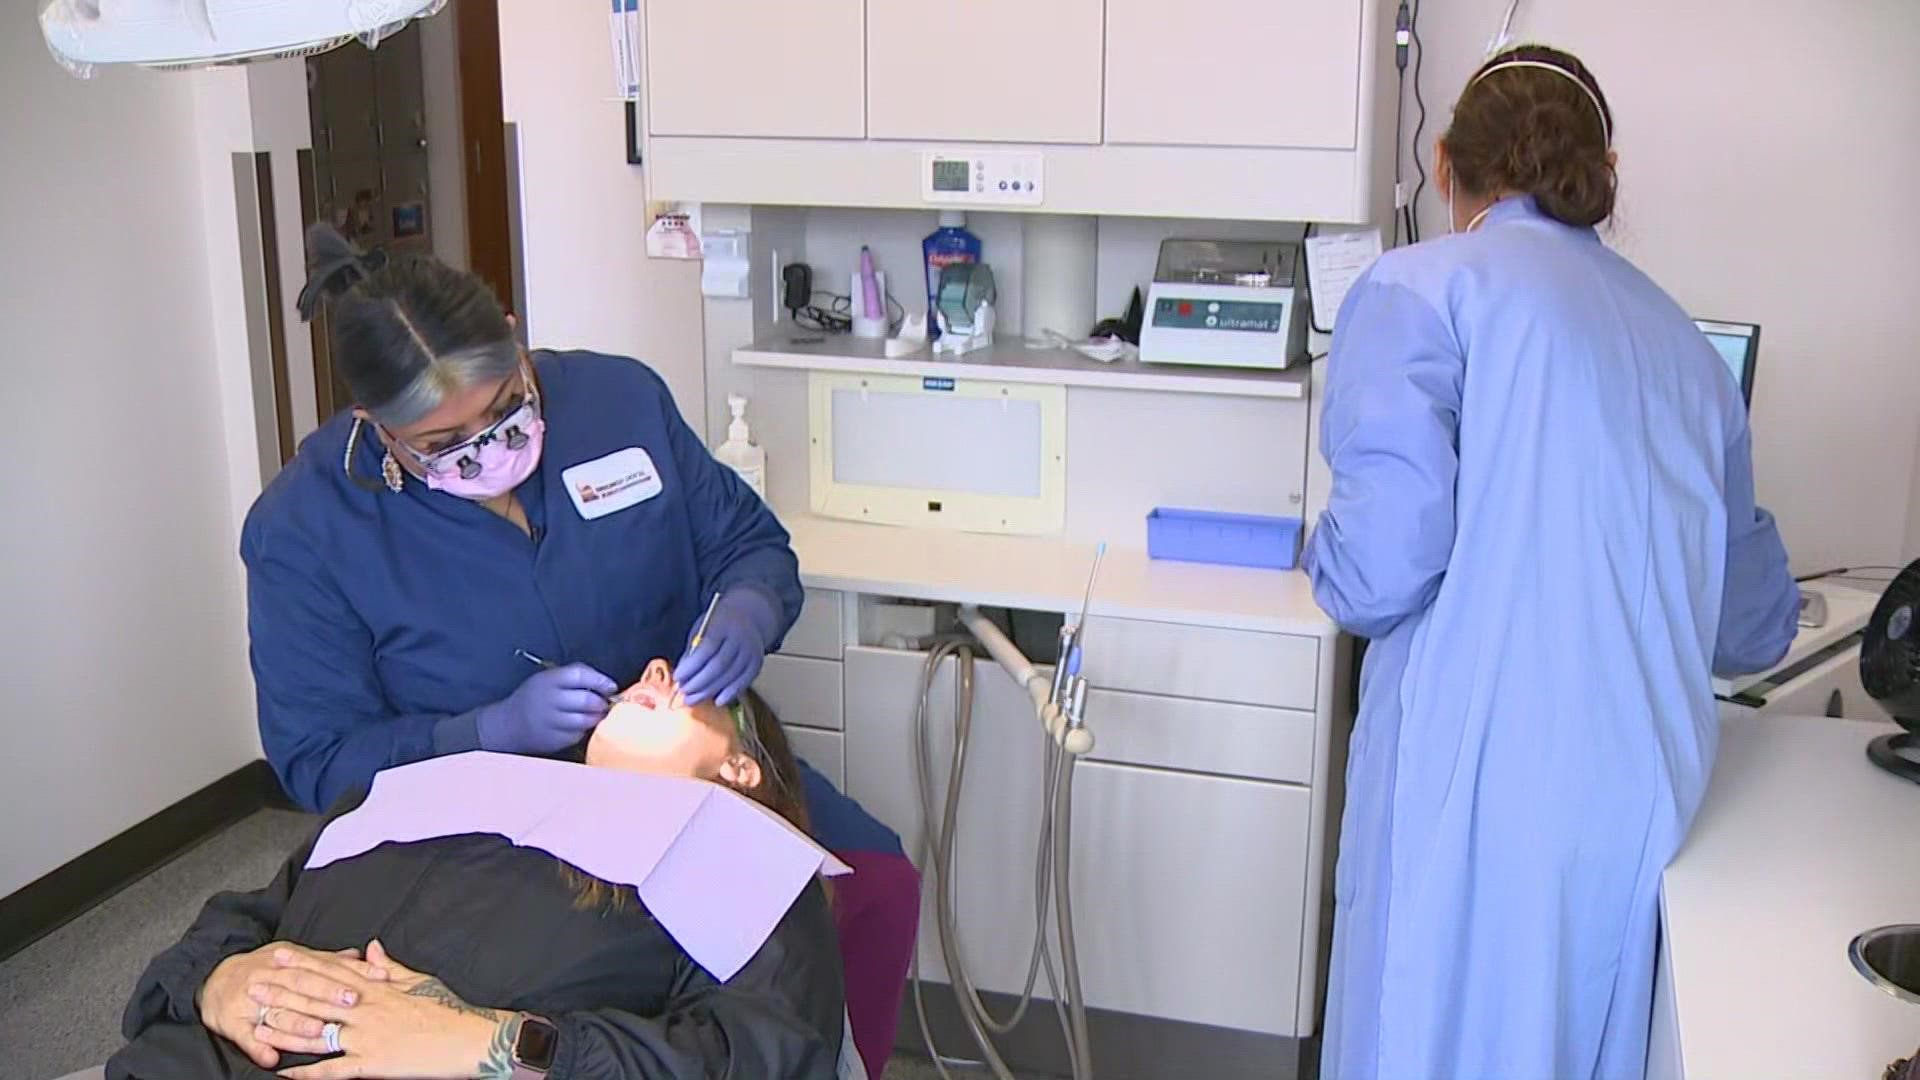 Many Swinomish Indian Tribal Community members have had painful, and even traumatic, experiences in the dentist's chair. A new program aims to change that.